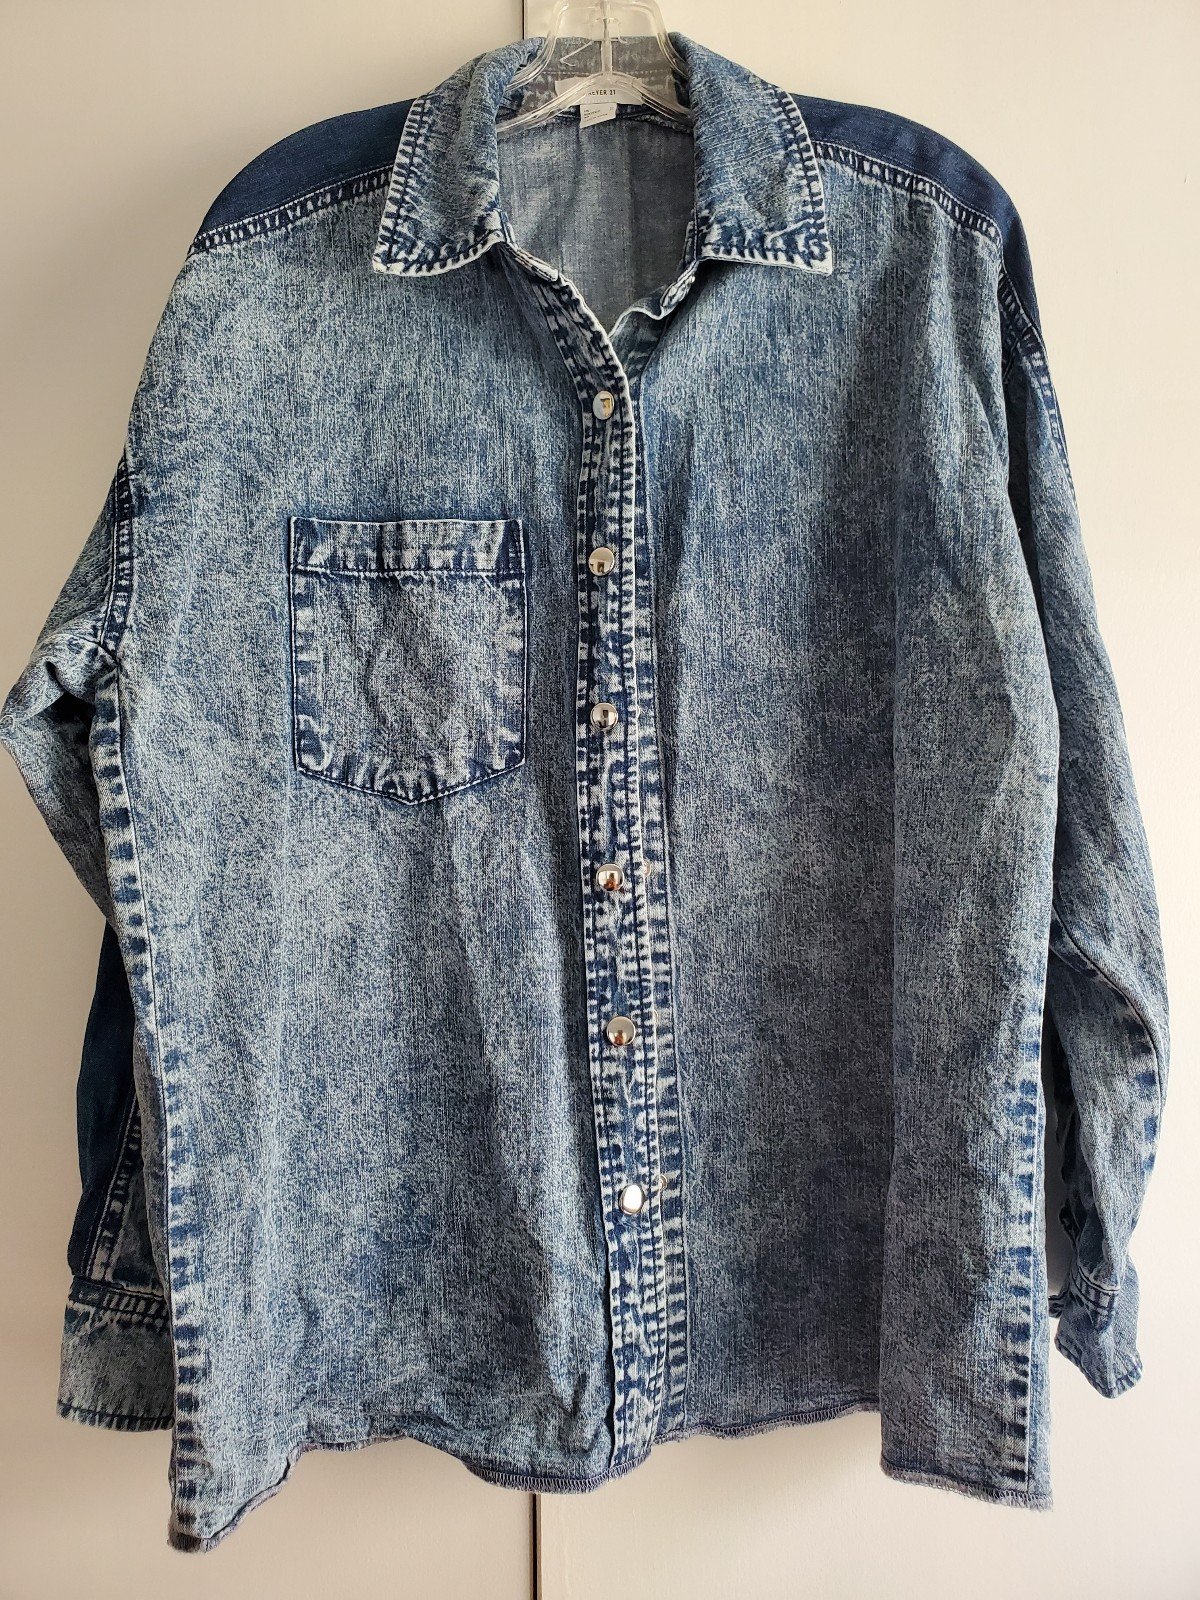 cheapest place to buy  Forever 21 Denim Jacket FoMwxXFz